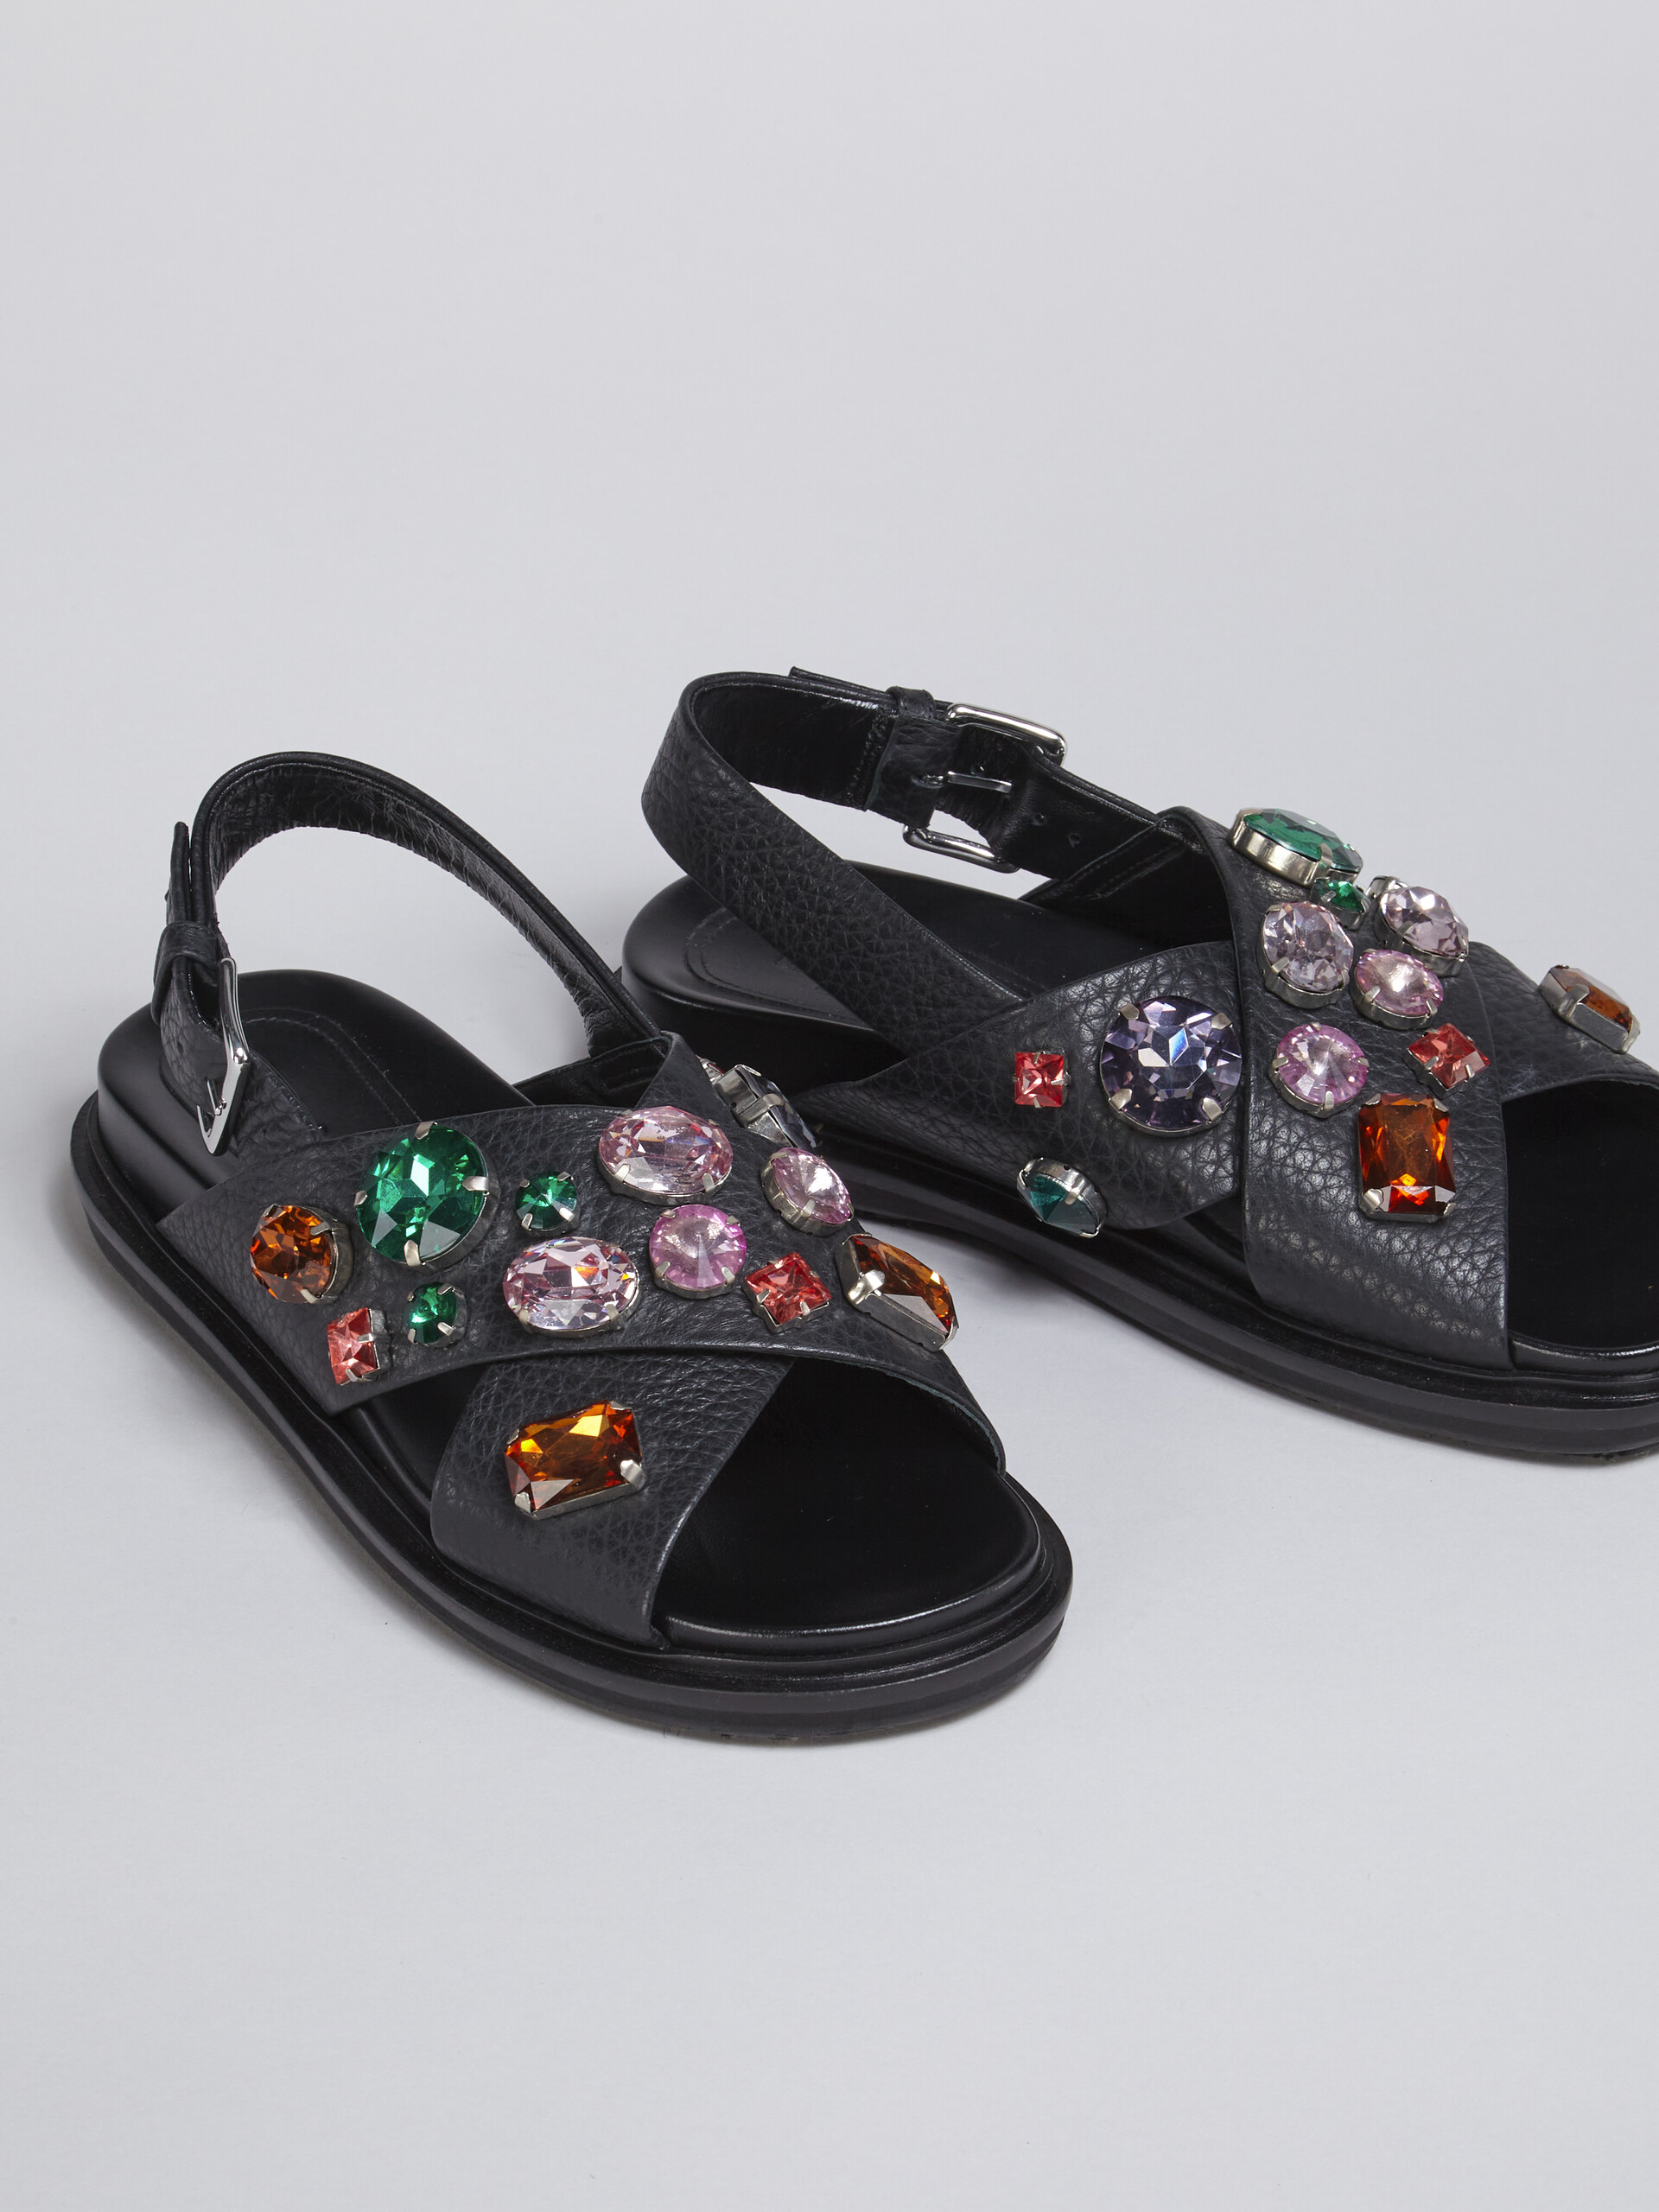 Black leather Fussbett with glass beads - Sandals - Image 5